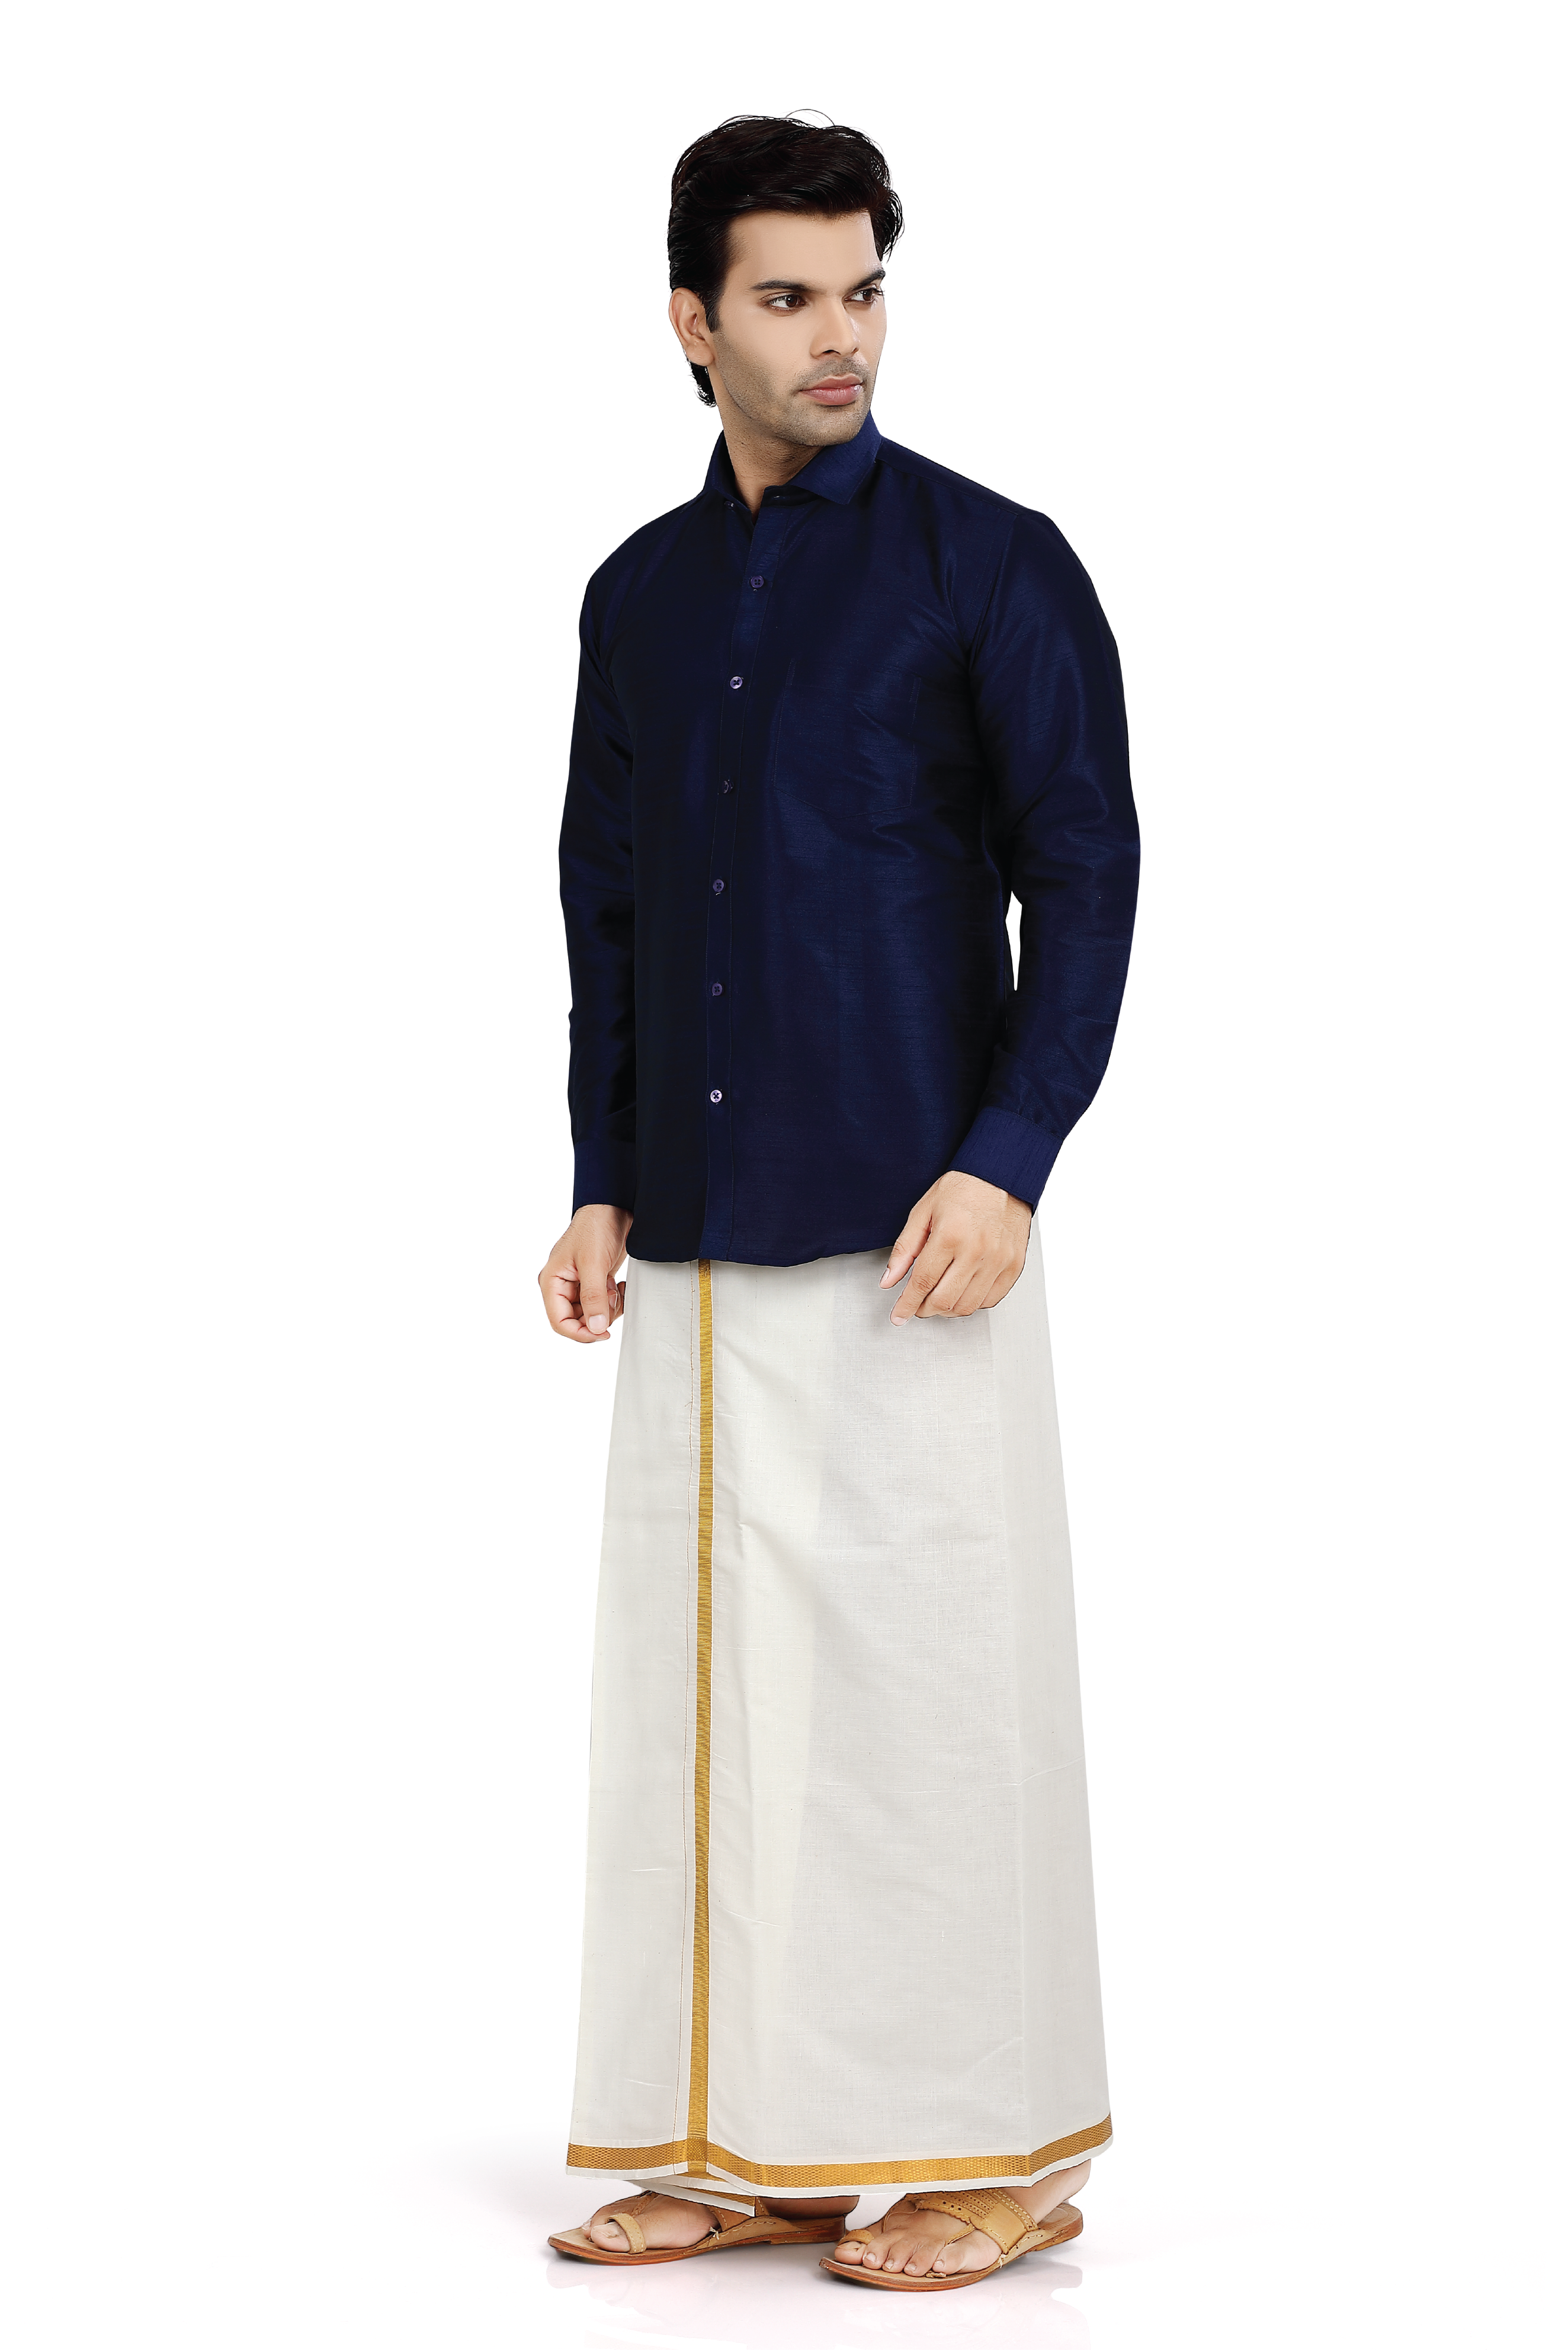 Dupion Silk Shirt in Navy Blue Full sleeves with Dhoti - Premium Dhoti Kurta from Dapper Ethnic - Just $95! Shop now at Dulhan Exclusives